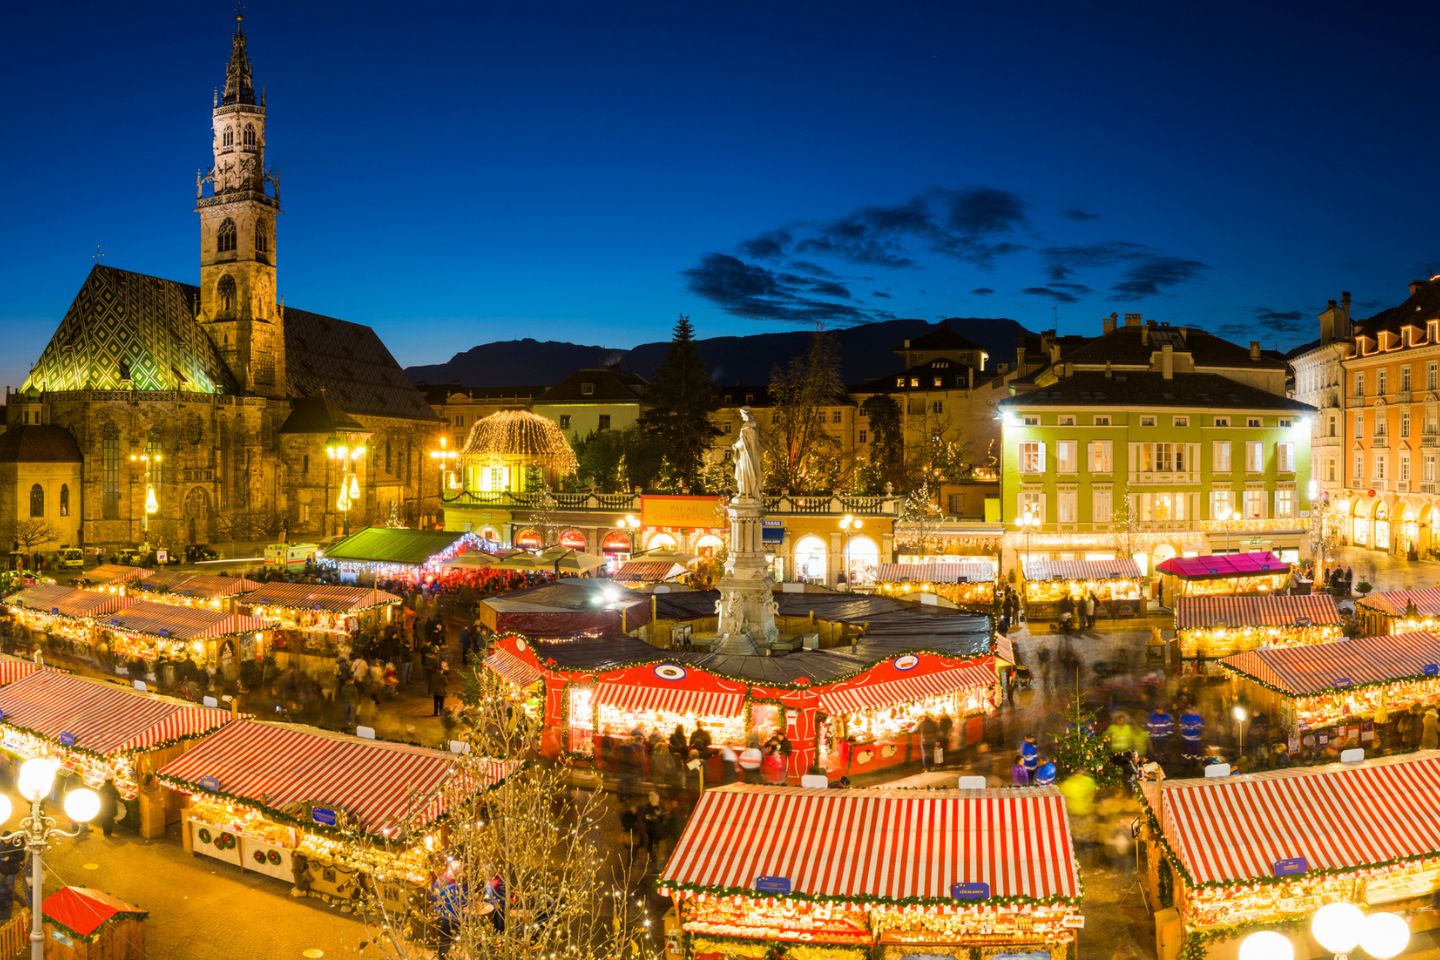 What You Should Know About Bolzano, Italy's Christmas Capital